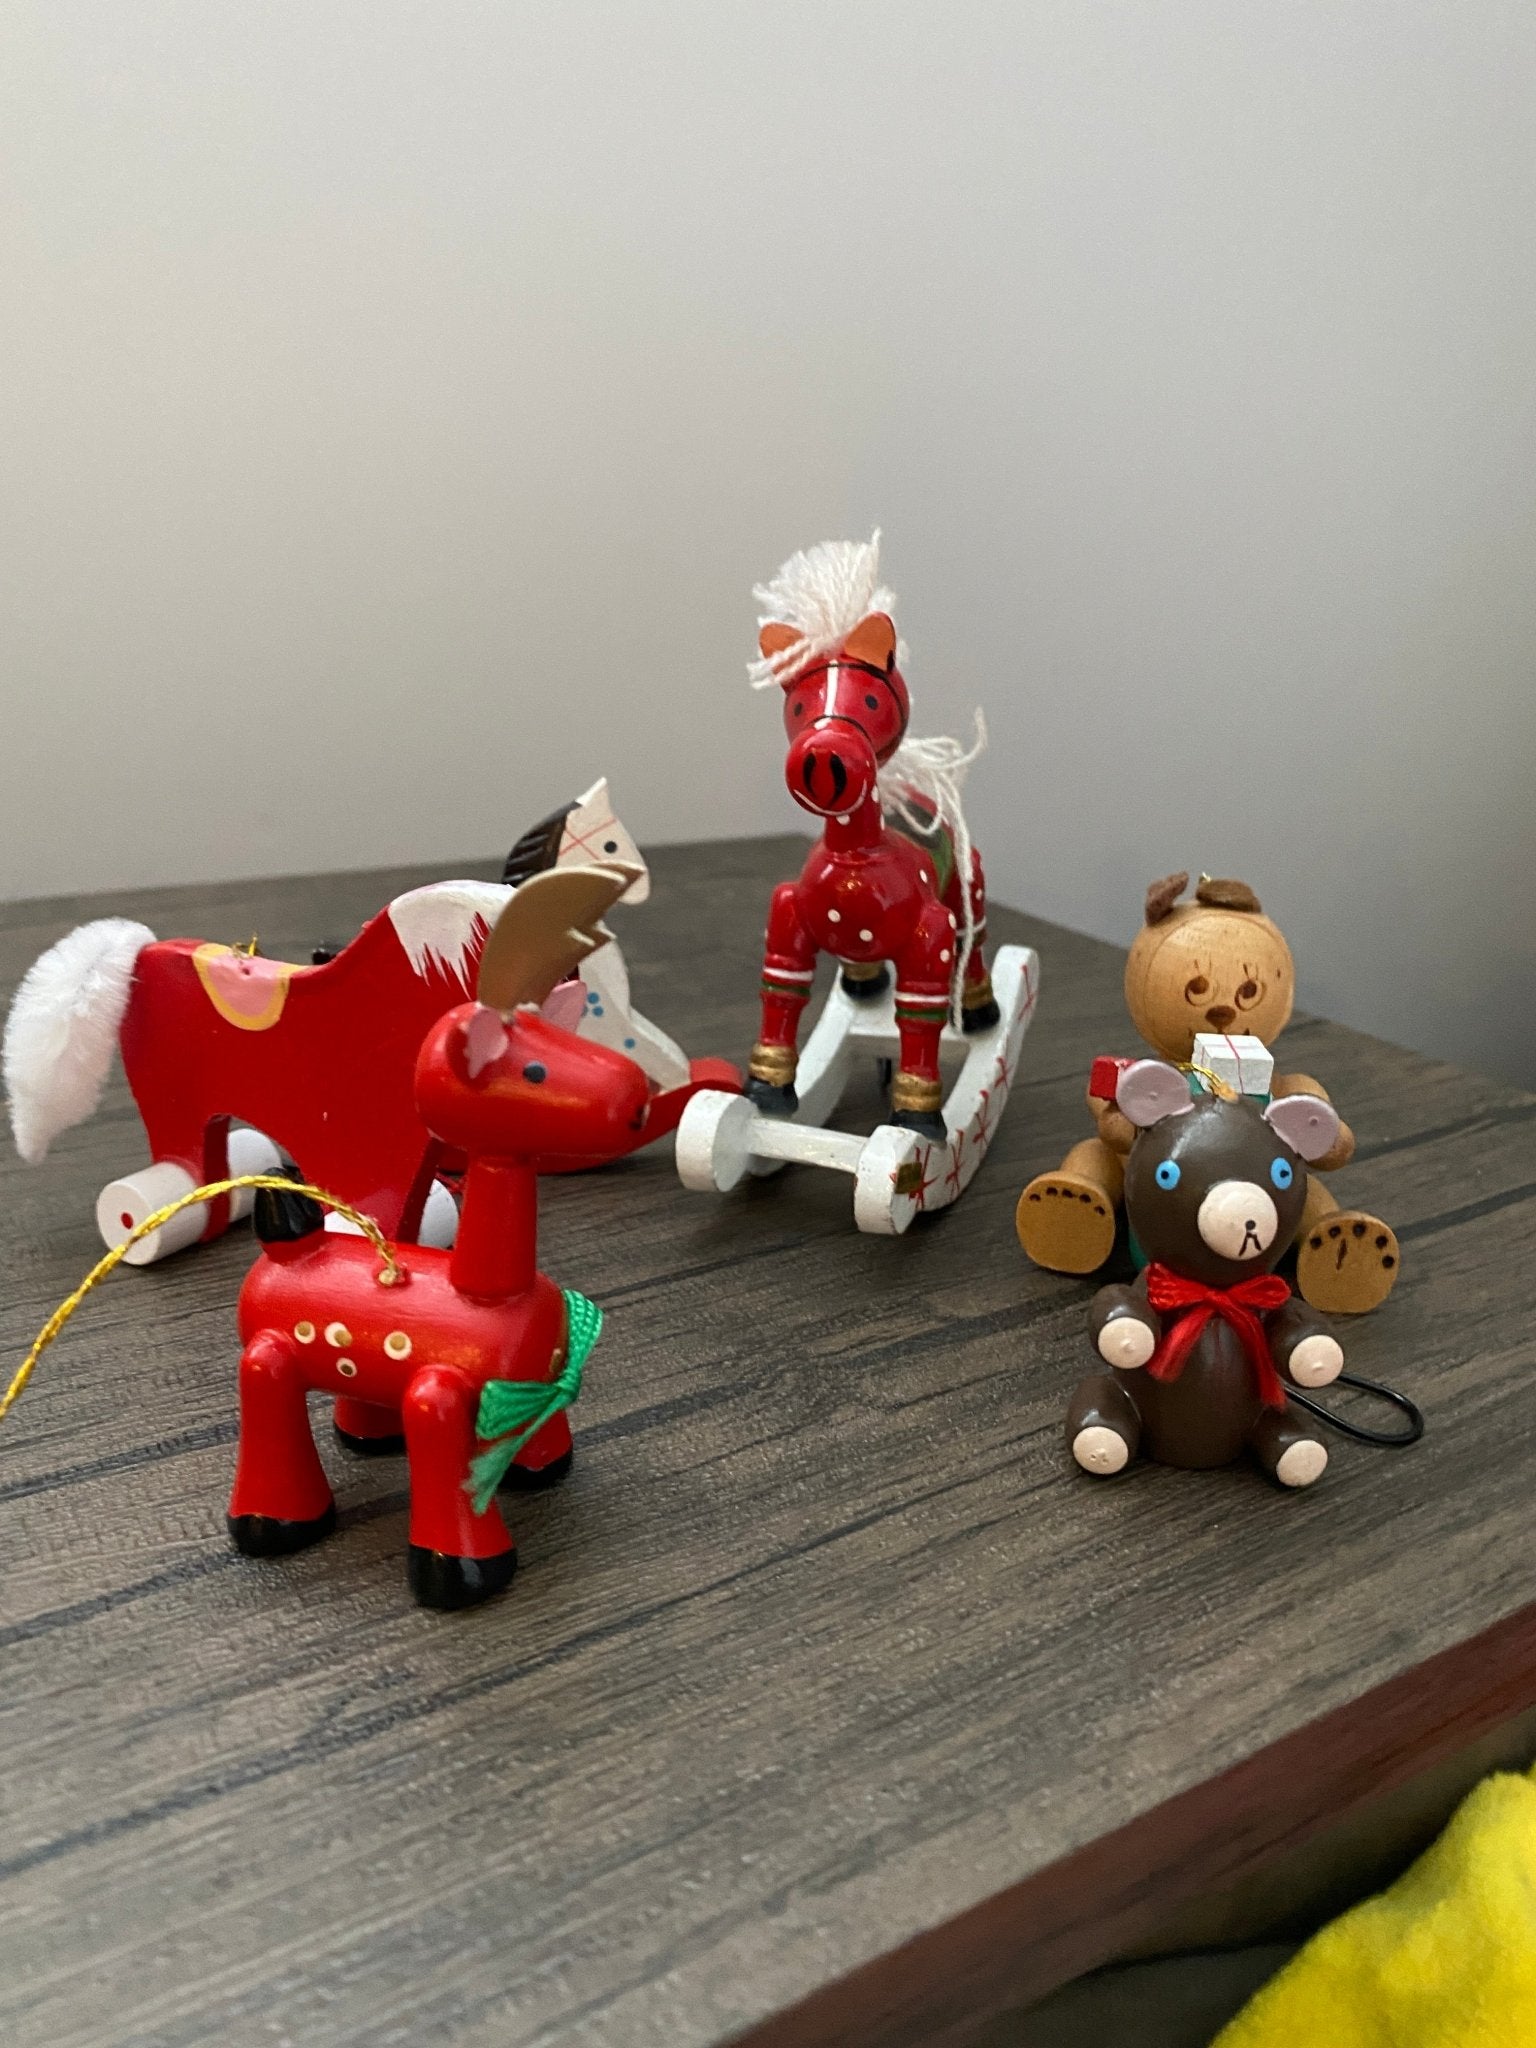 Lot of Vintage Wooden Christmas Ornaments - Handpainted Animals - Perth Market